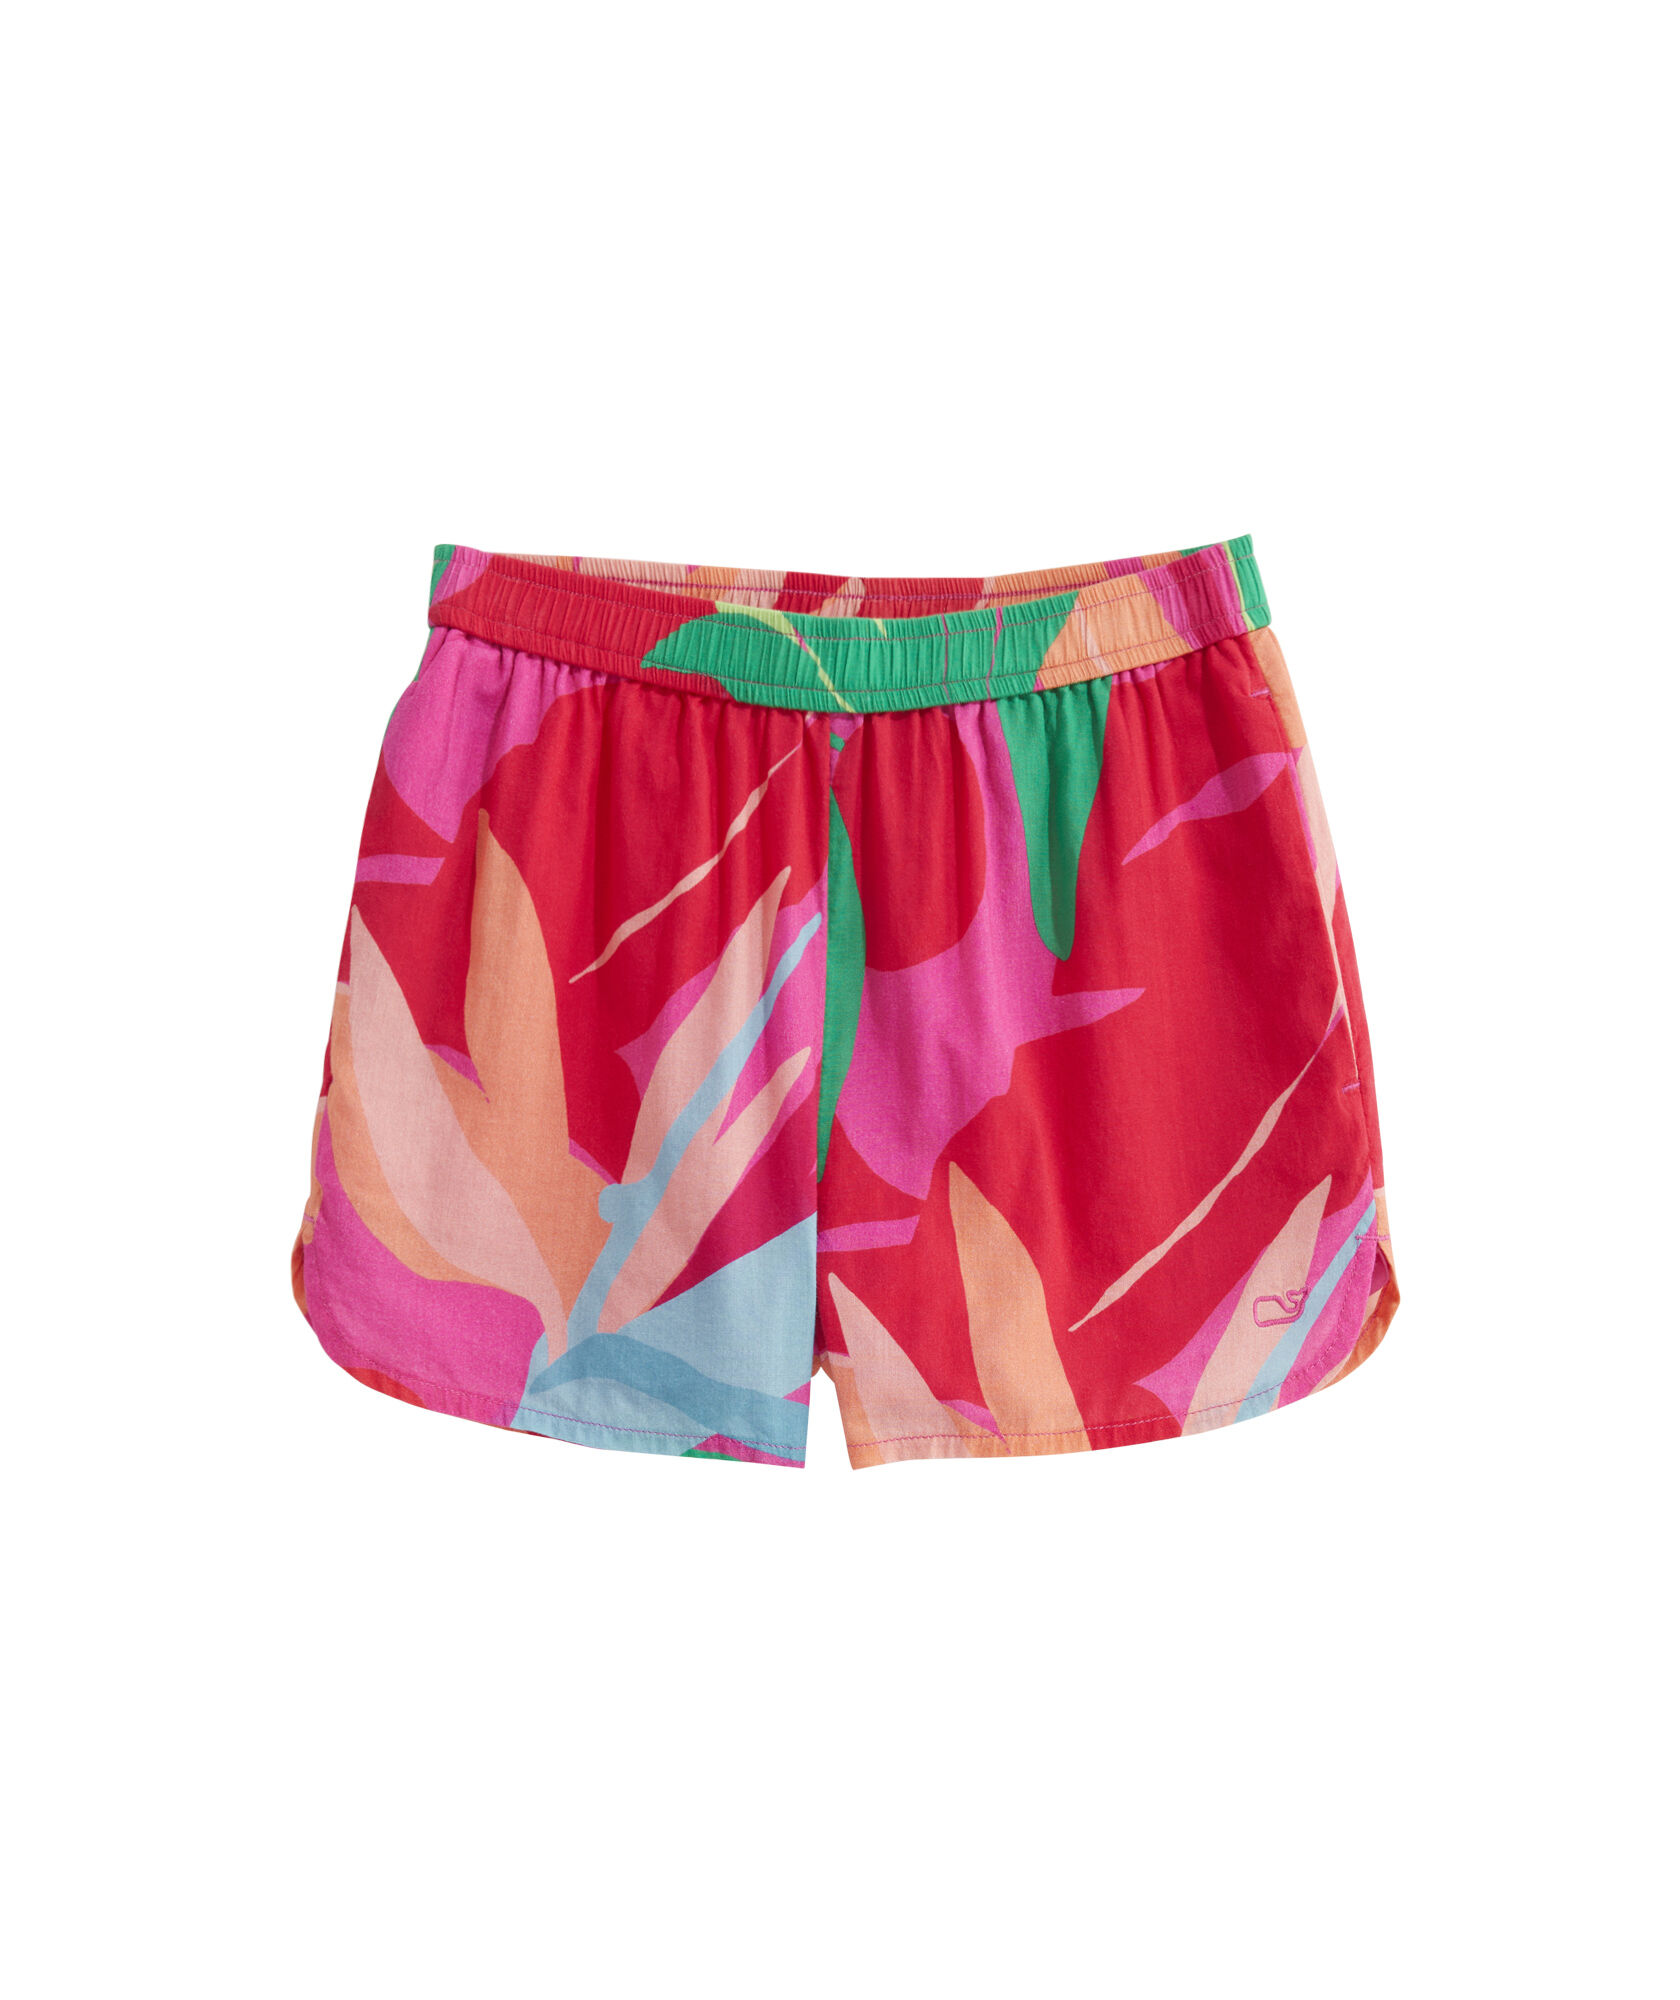 OUTLET Girls' Printed Pull-On Shorts